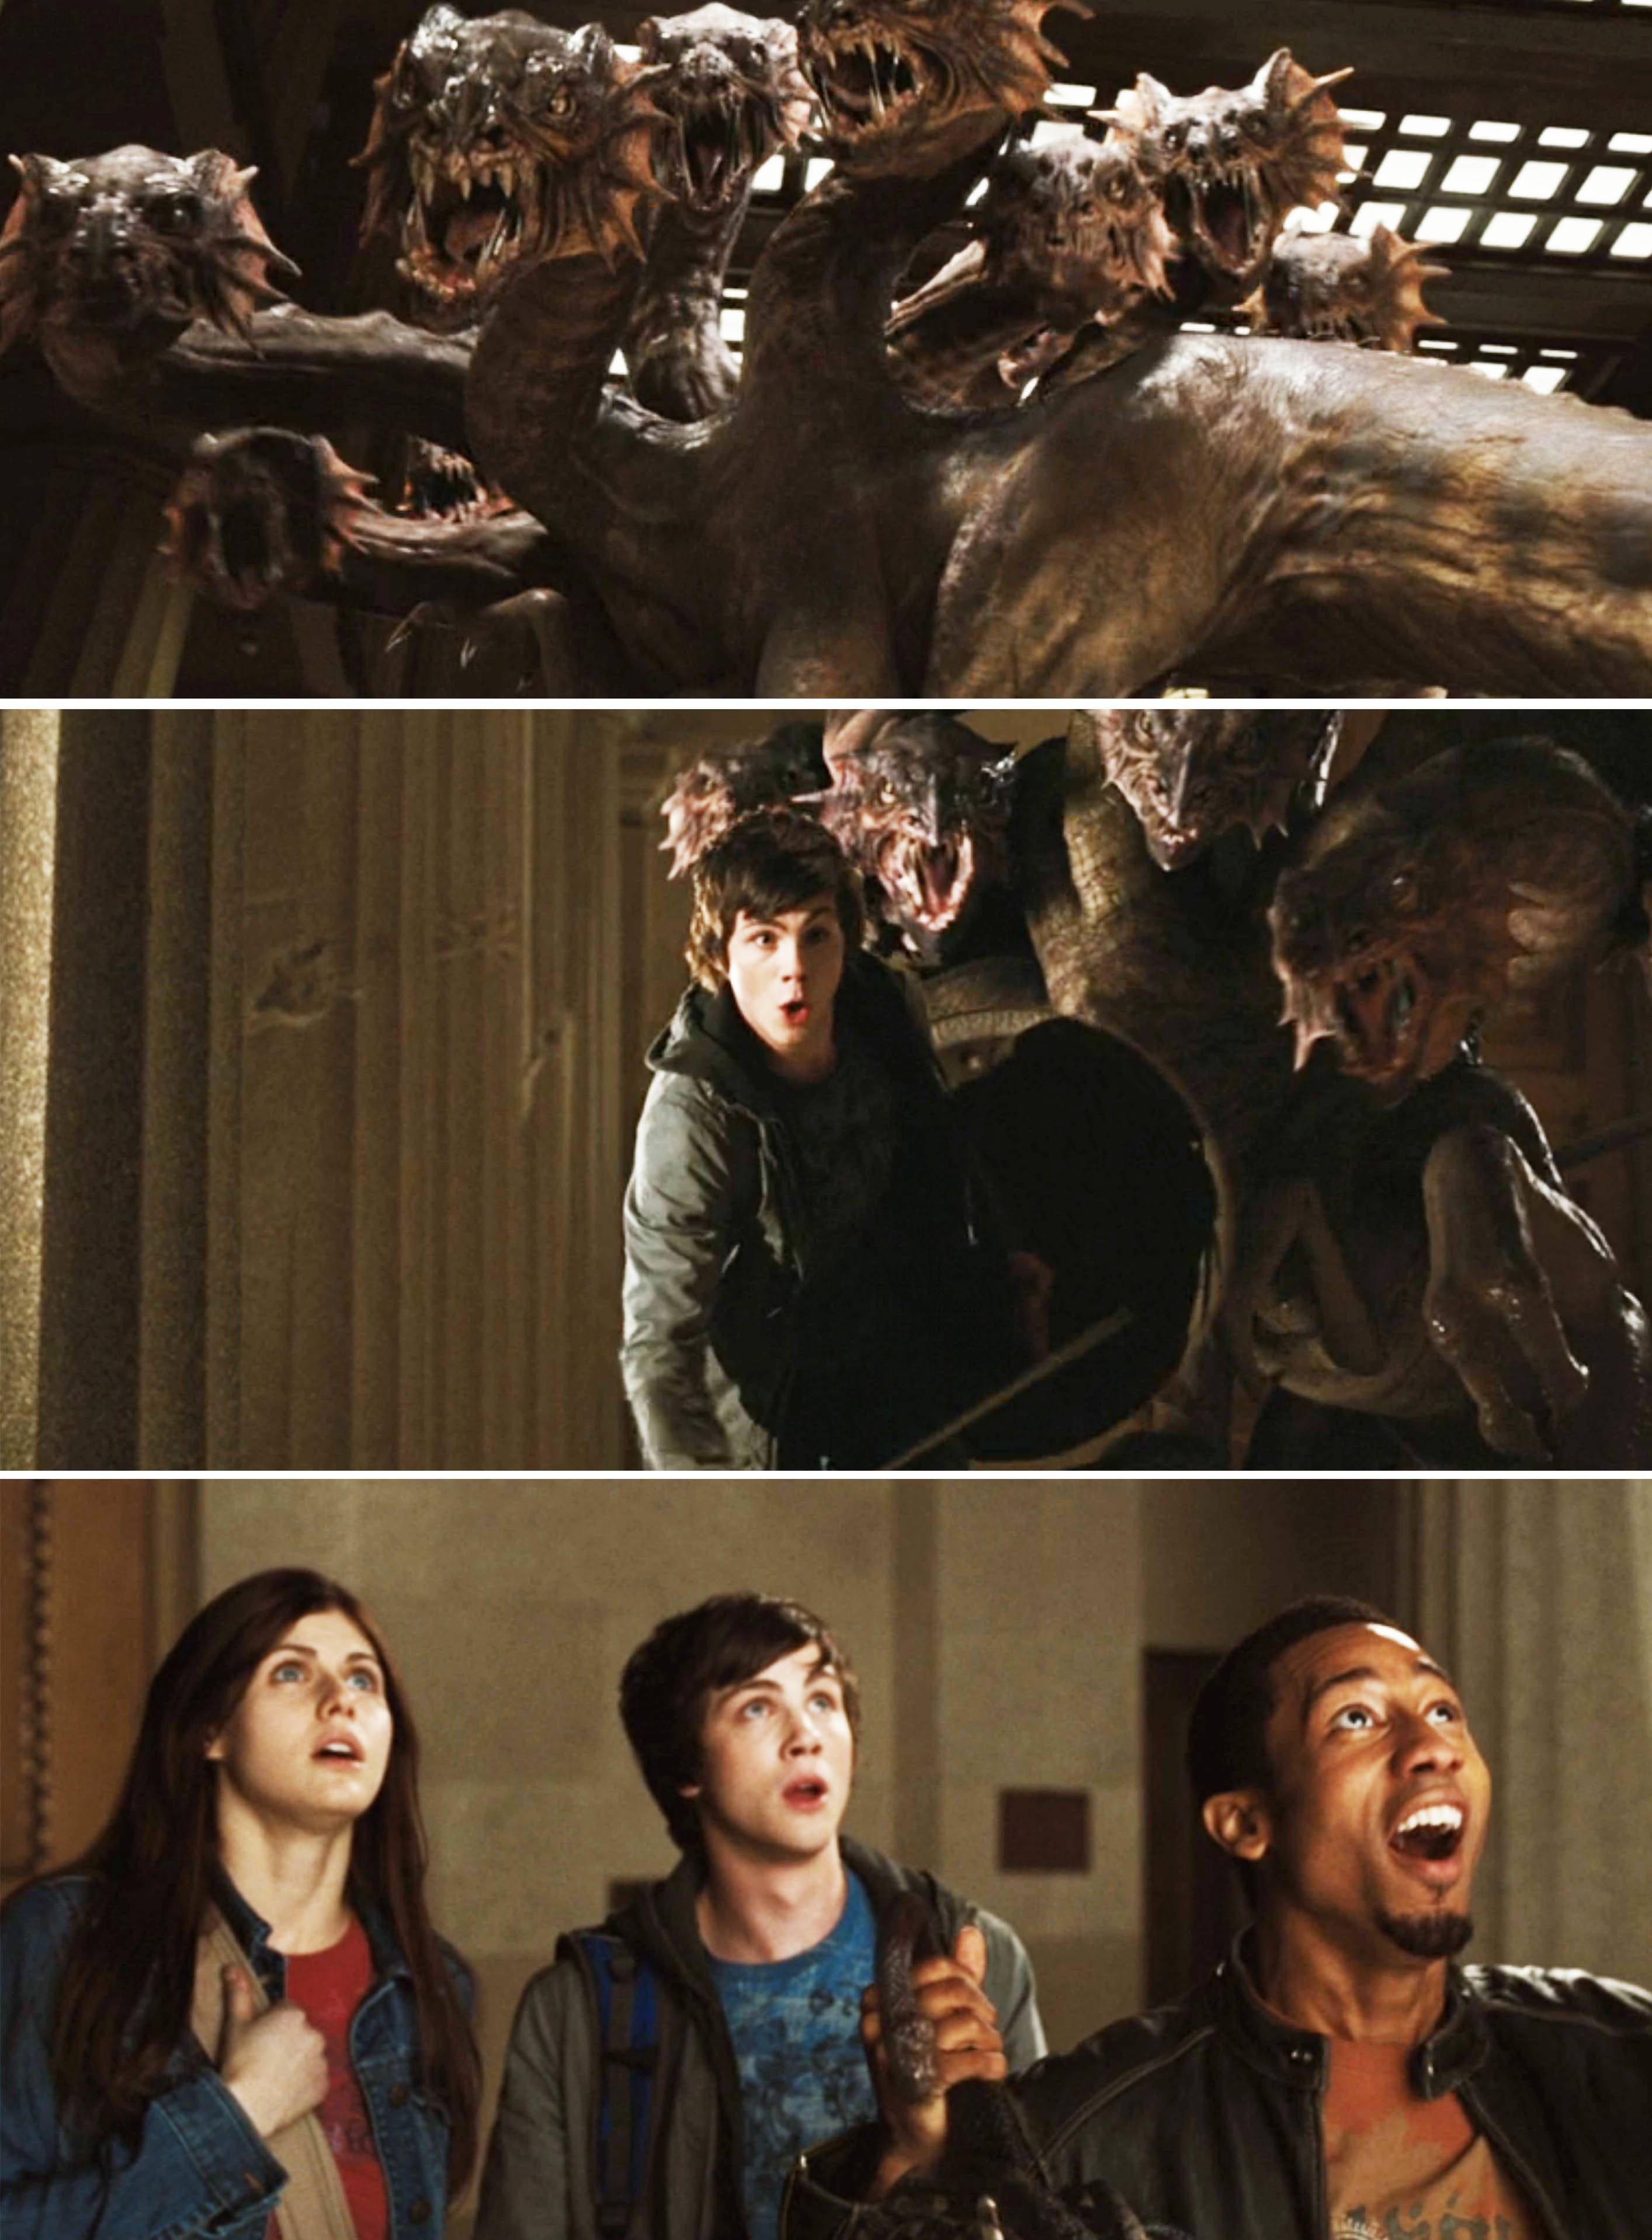 Percy, Annabeth, and Grover looking up and looking stunned